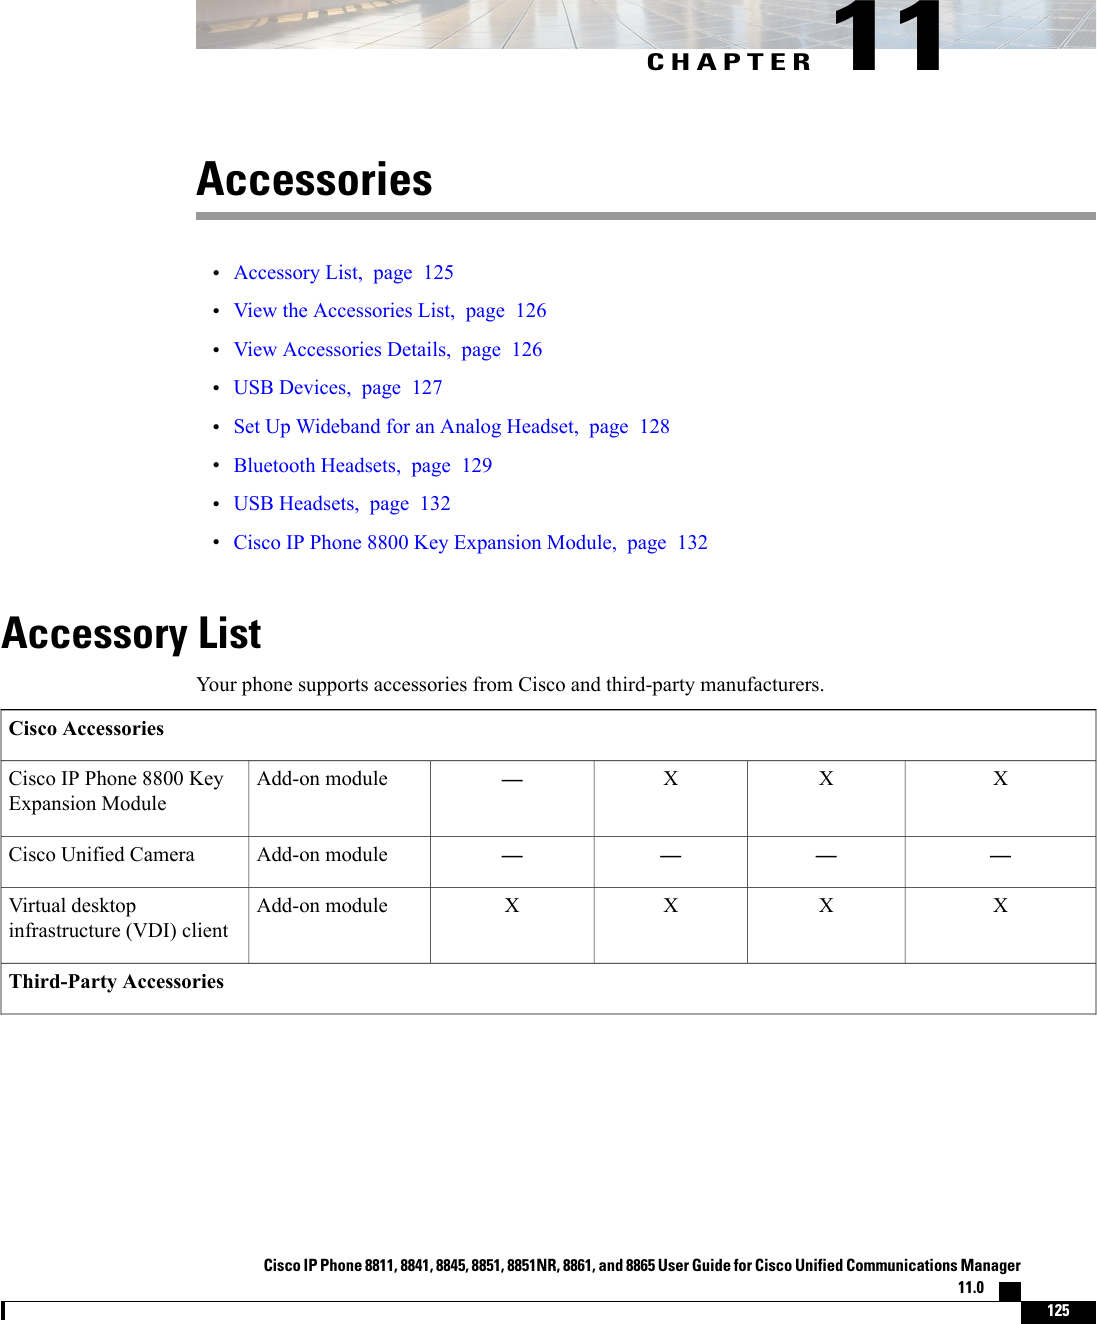 CHAPTER 11Accessories•Accessory List, page 125•View the Accessories List, page 126•View Accessories Details, page 126•USB Devices, page 127•Set Up Wideband for an Analog Headset, page 128•Bluetooth Headsets, page 129•USB Headsets, page 132•Cisco IP Phone 8800 Key Expansion Module, page 132Accessory ListYour phone supports accessories from Cisco and third-party manufacturers.Cisco AccessoriesXXX—Add-on moduleCisco IP Phone 8800 KeyExpansion Module————Add-on moduleCisco Unified CameraXXXXAdd-on moduleVirtual desktopinfrastructure (VDI) clientThird-Party AccessoriesCisco IP Phone 8811, 8841, 8845, 8851, 8851NR, 8861, and 8865 User Guide for Cisco Unified Communications Manager11.0    125